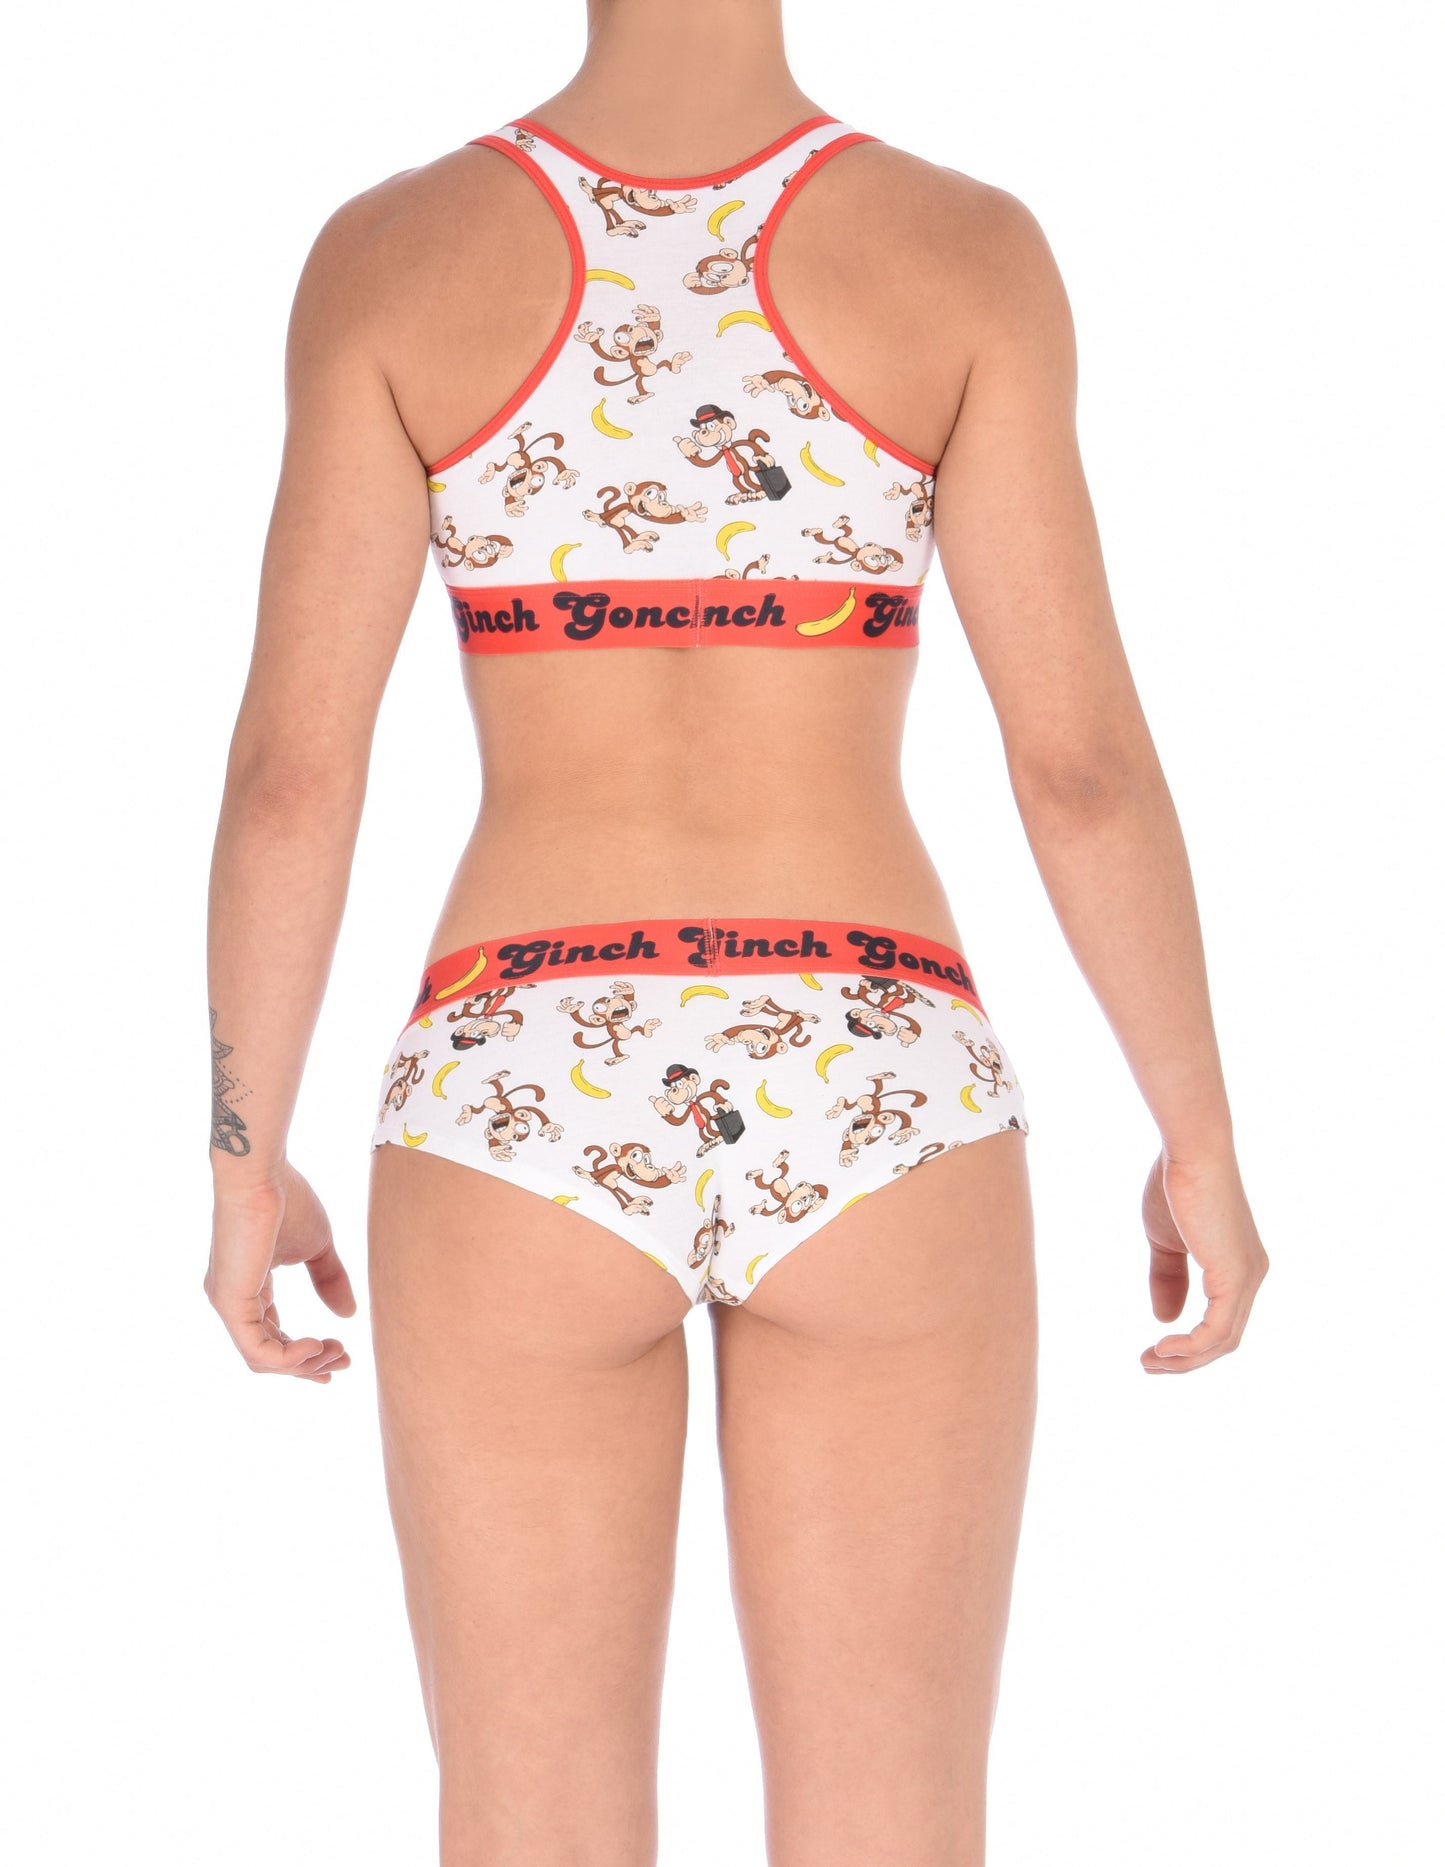 GG Ginch Gonch Gone Bananas cheeky gogo boy cut Brief women's underwear white fabric with monkeys and bananas red trim and red printed waistband back shown with matching sports bra